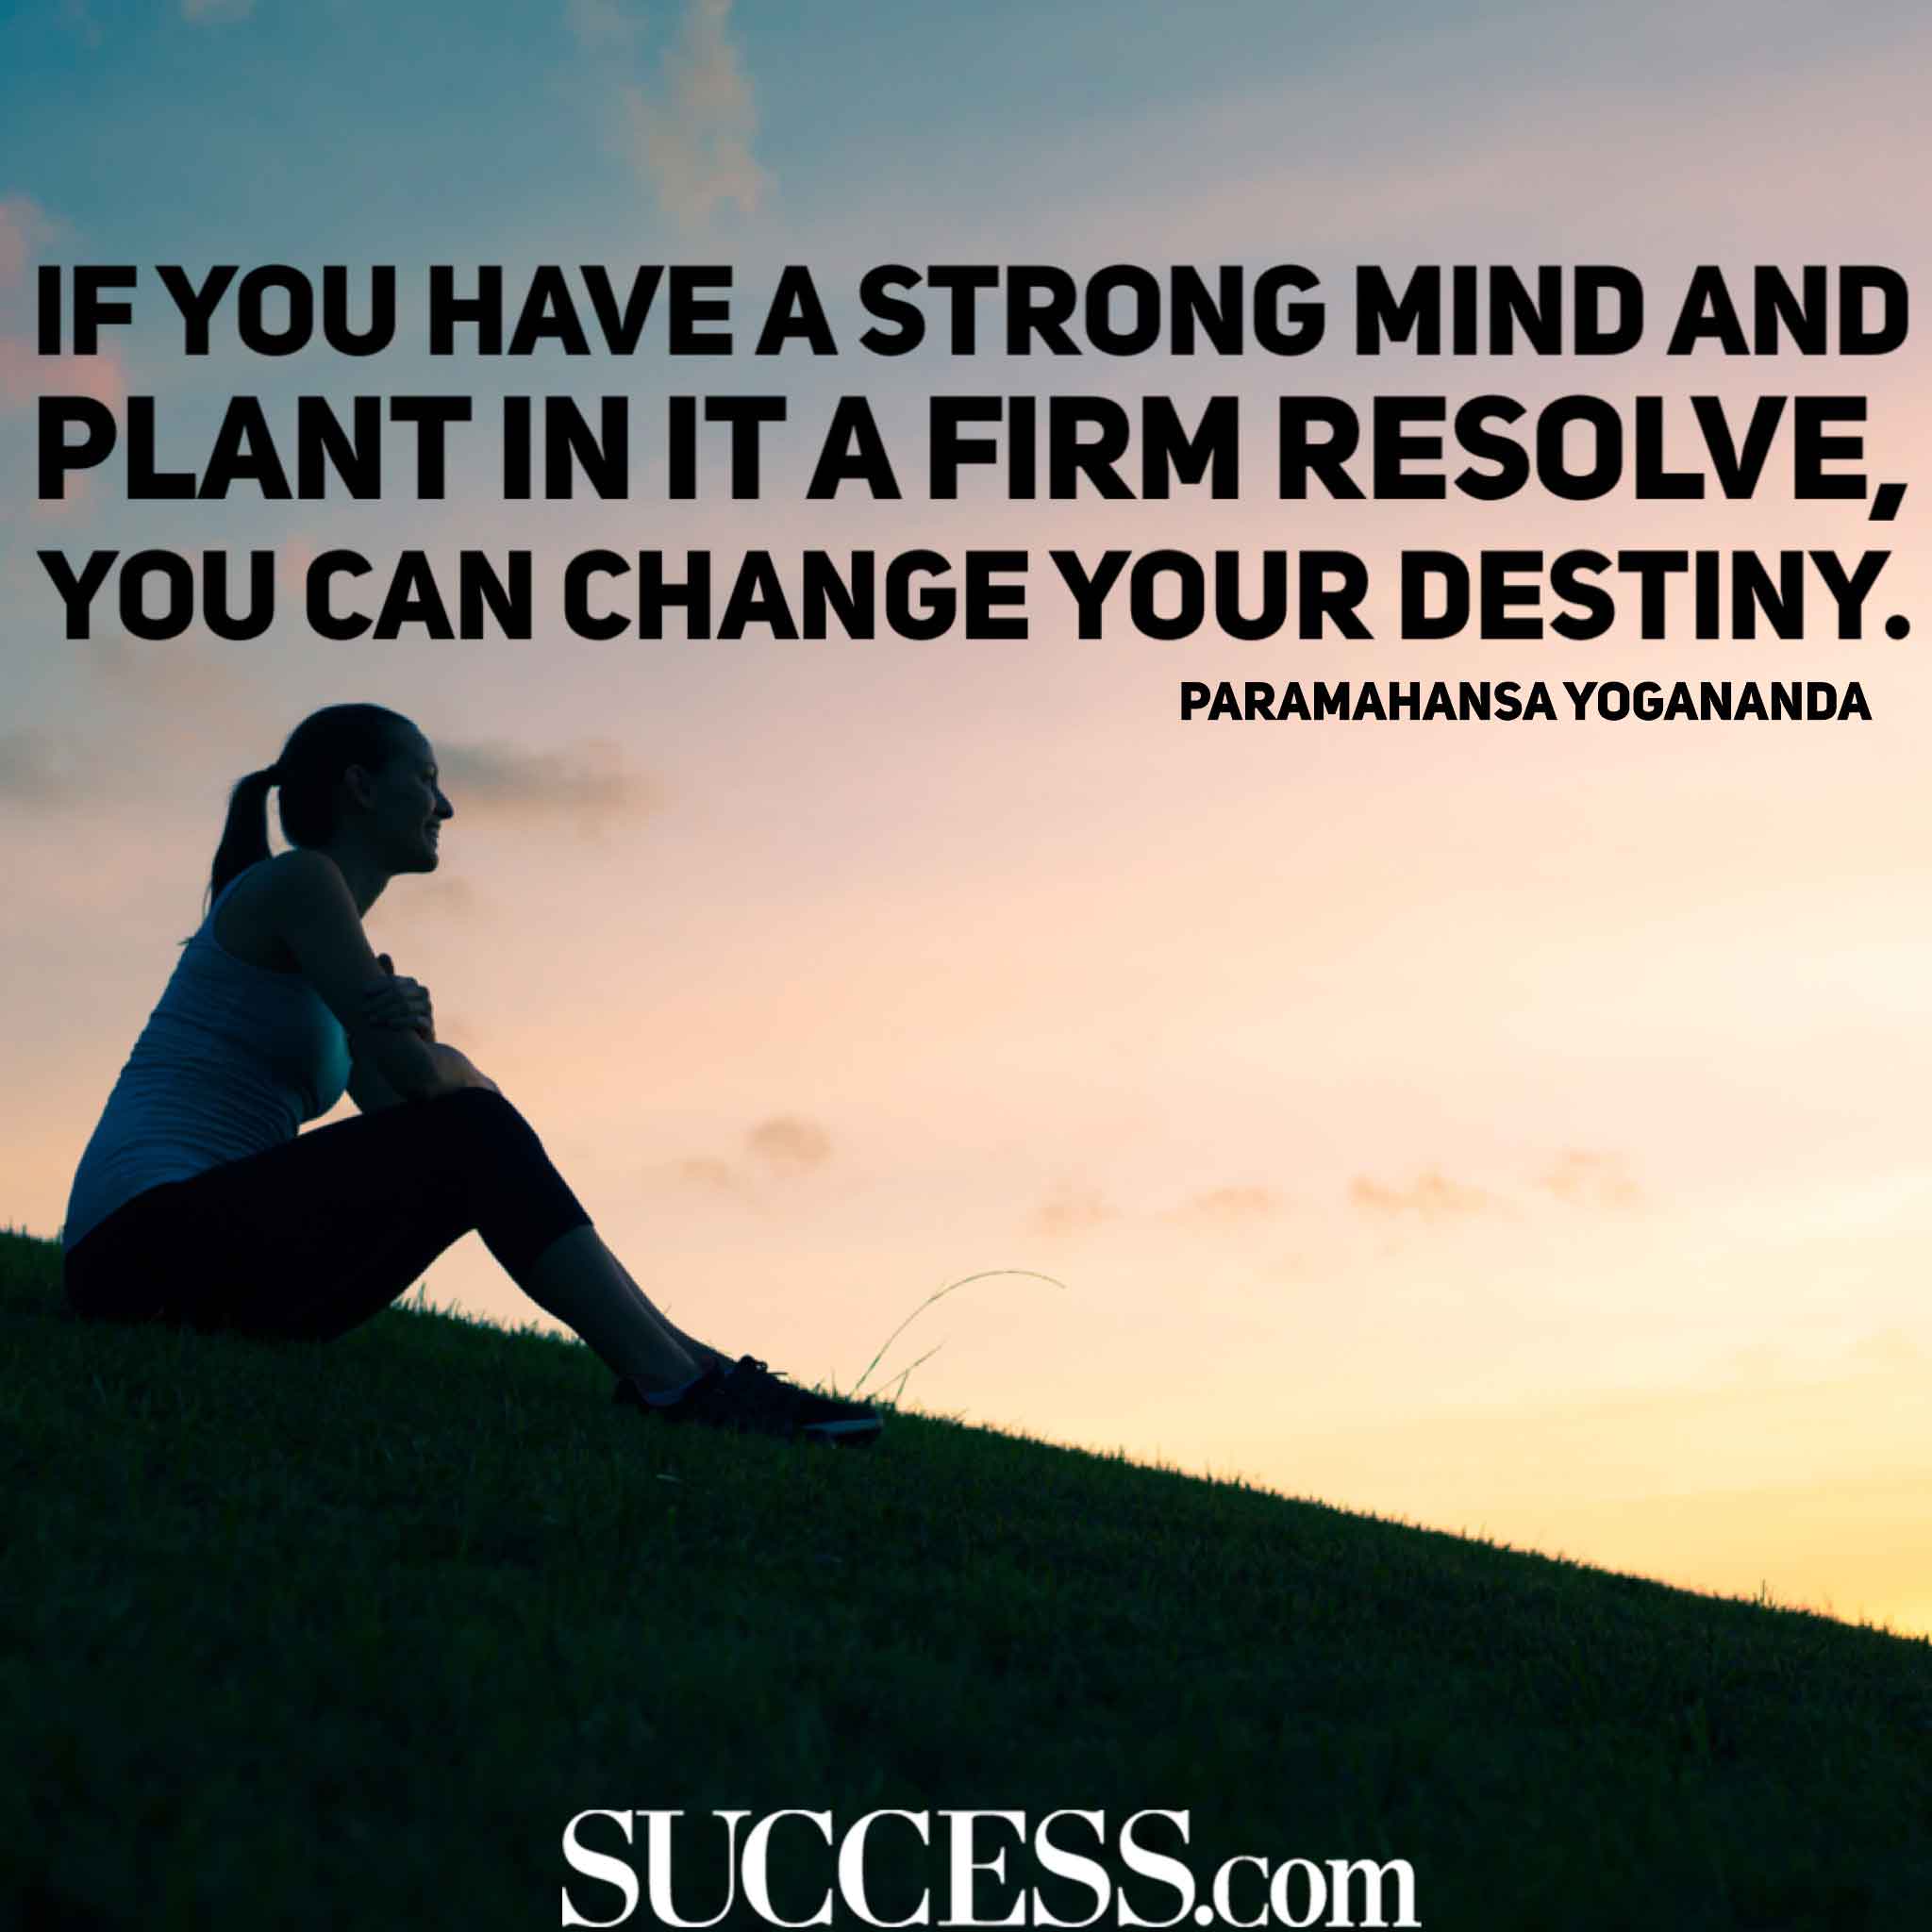 if you have a strong mind and plant in it a firm resolve, you can change your destiny. oaramahansa yogananda